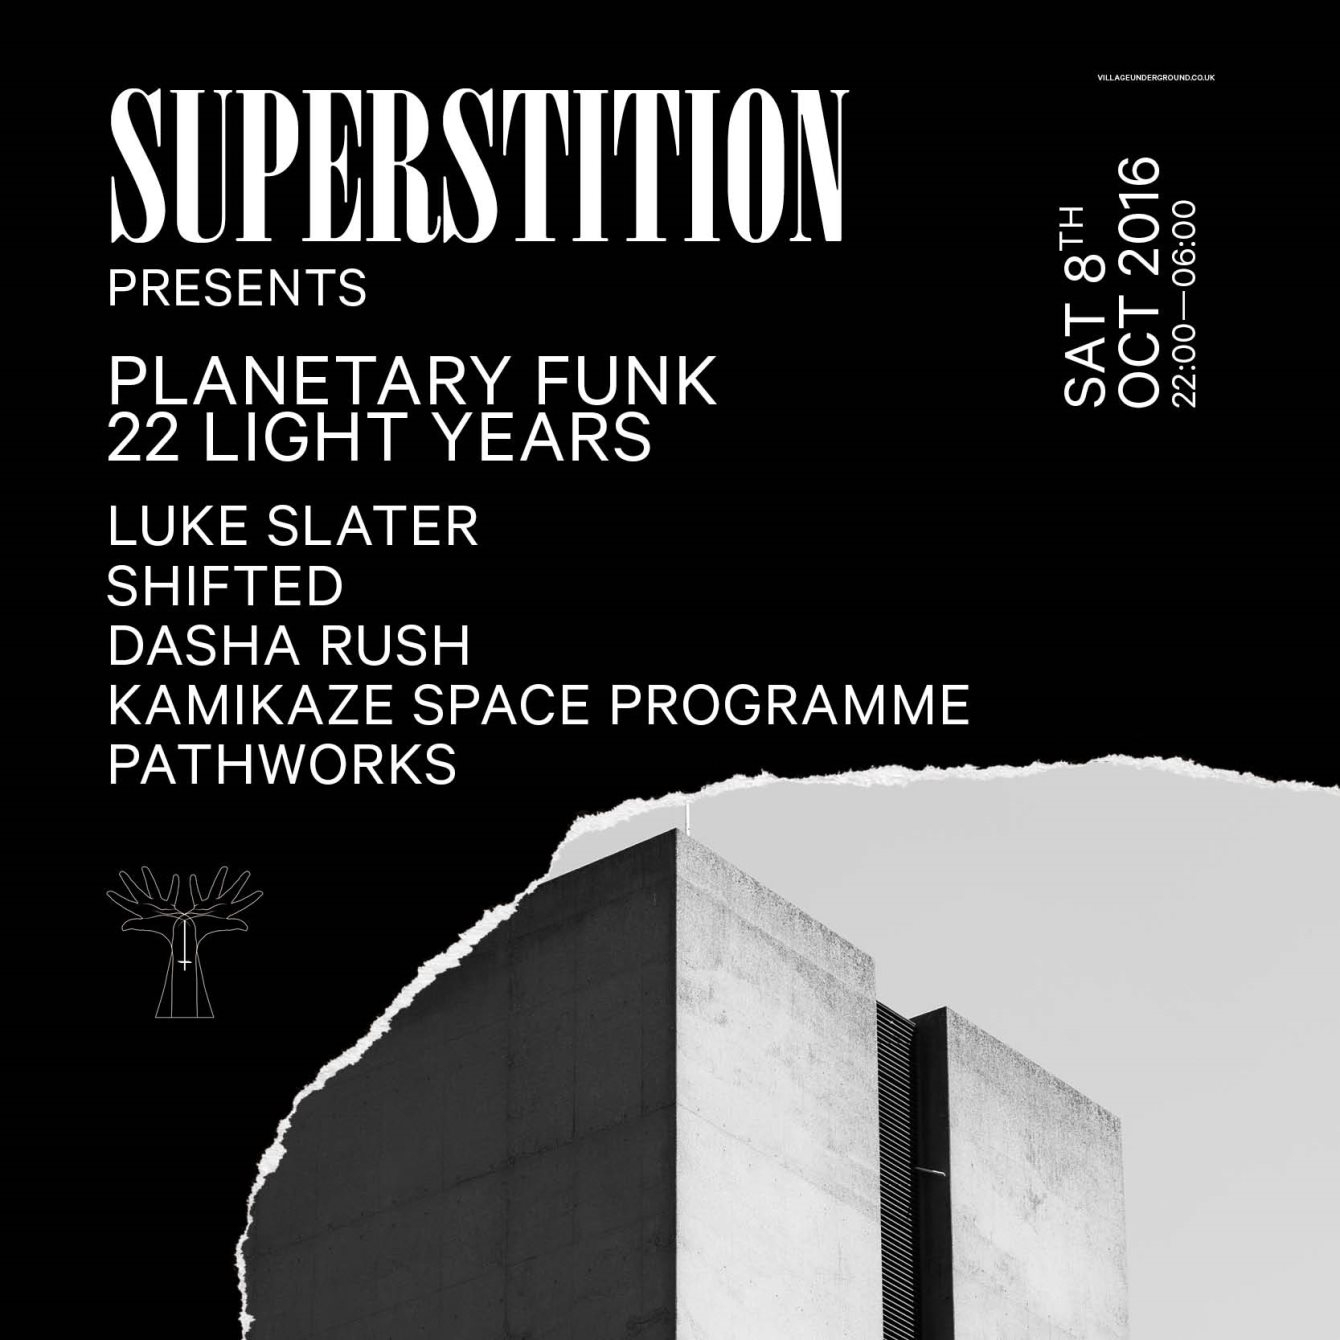 Superstition presents Planetary Funk 22 Light Years - Luke Slater, Shifted, Dasha Rush - Flyer front